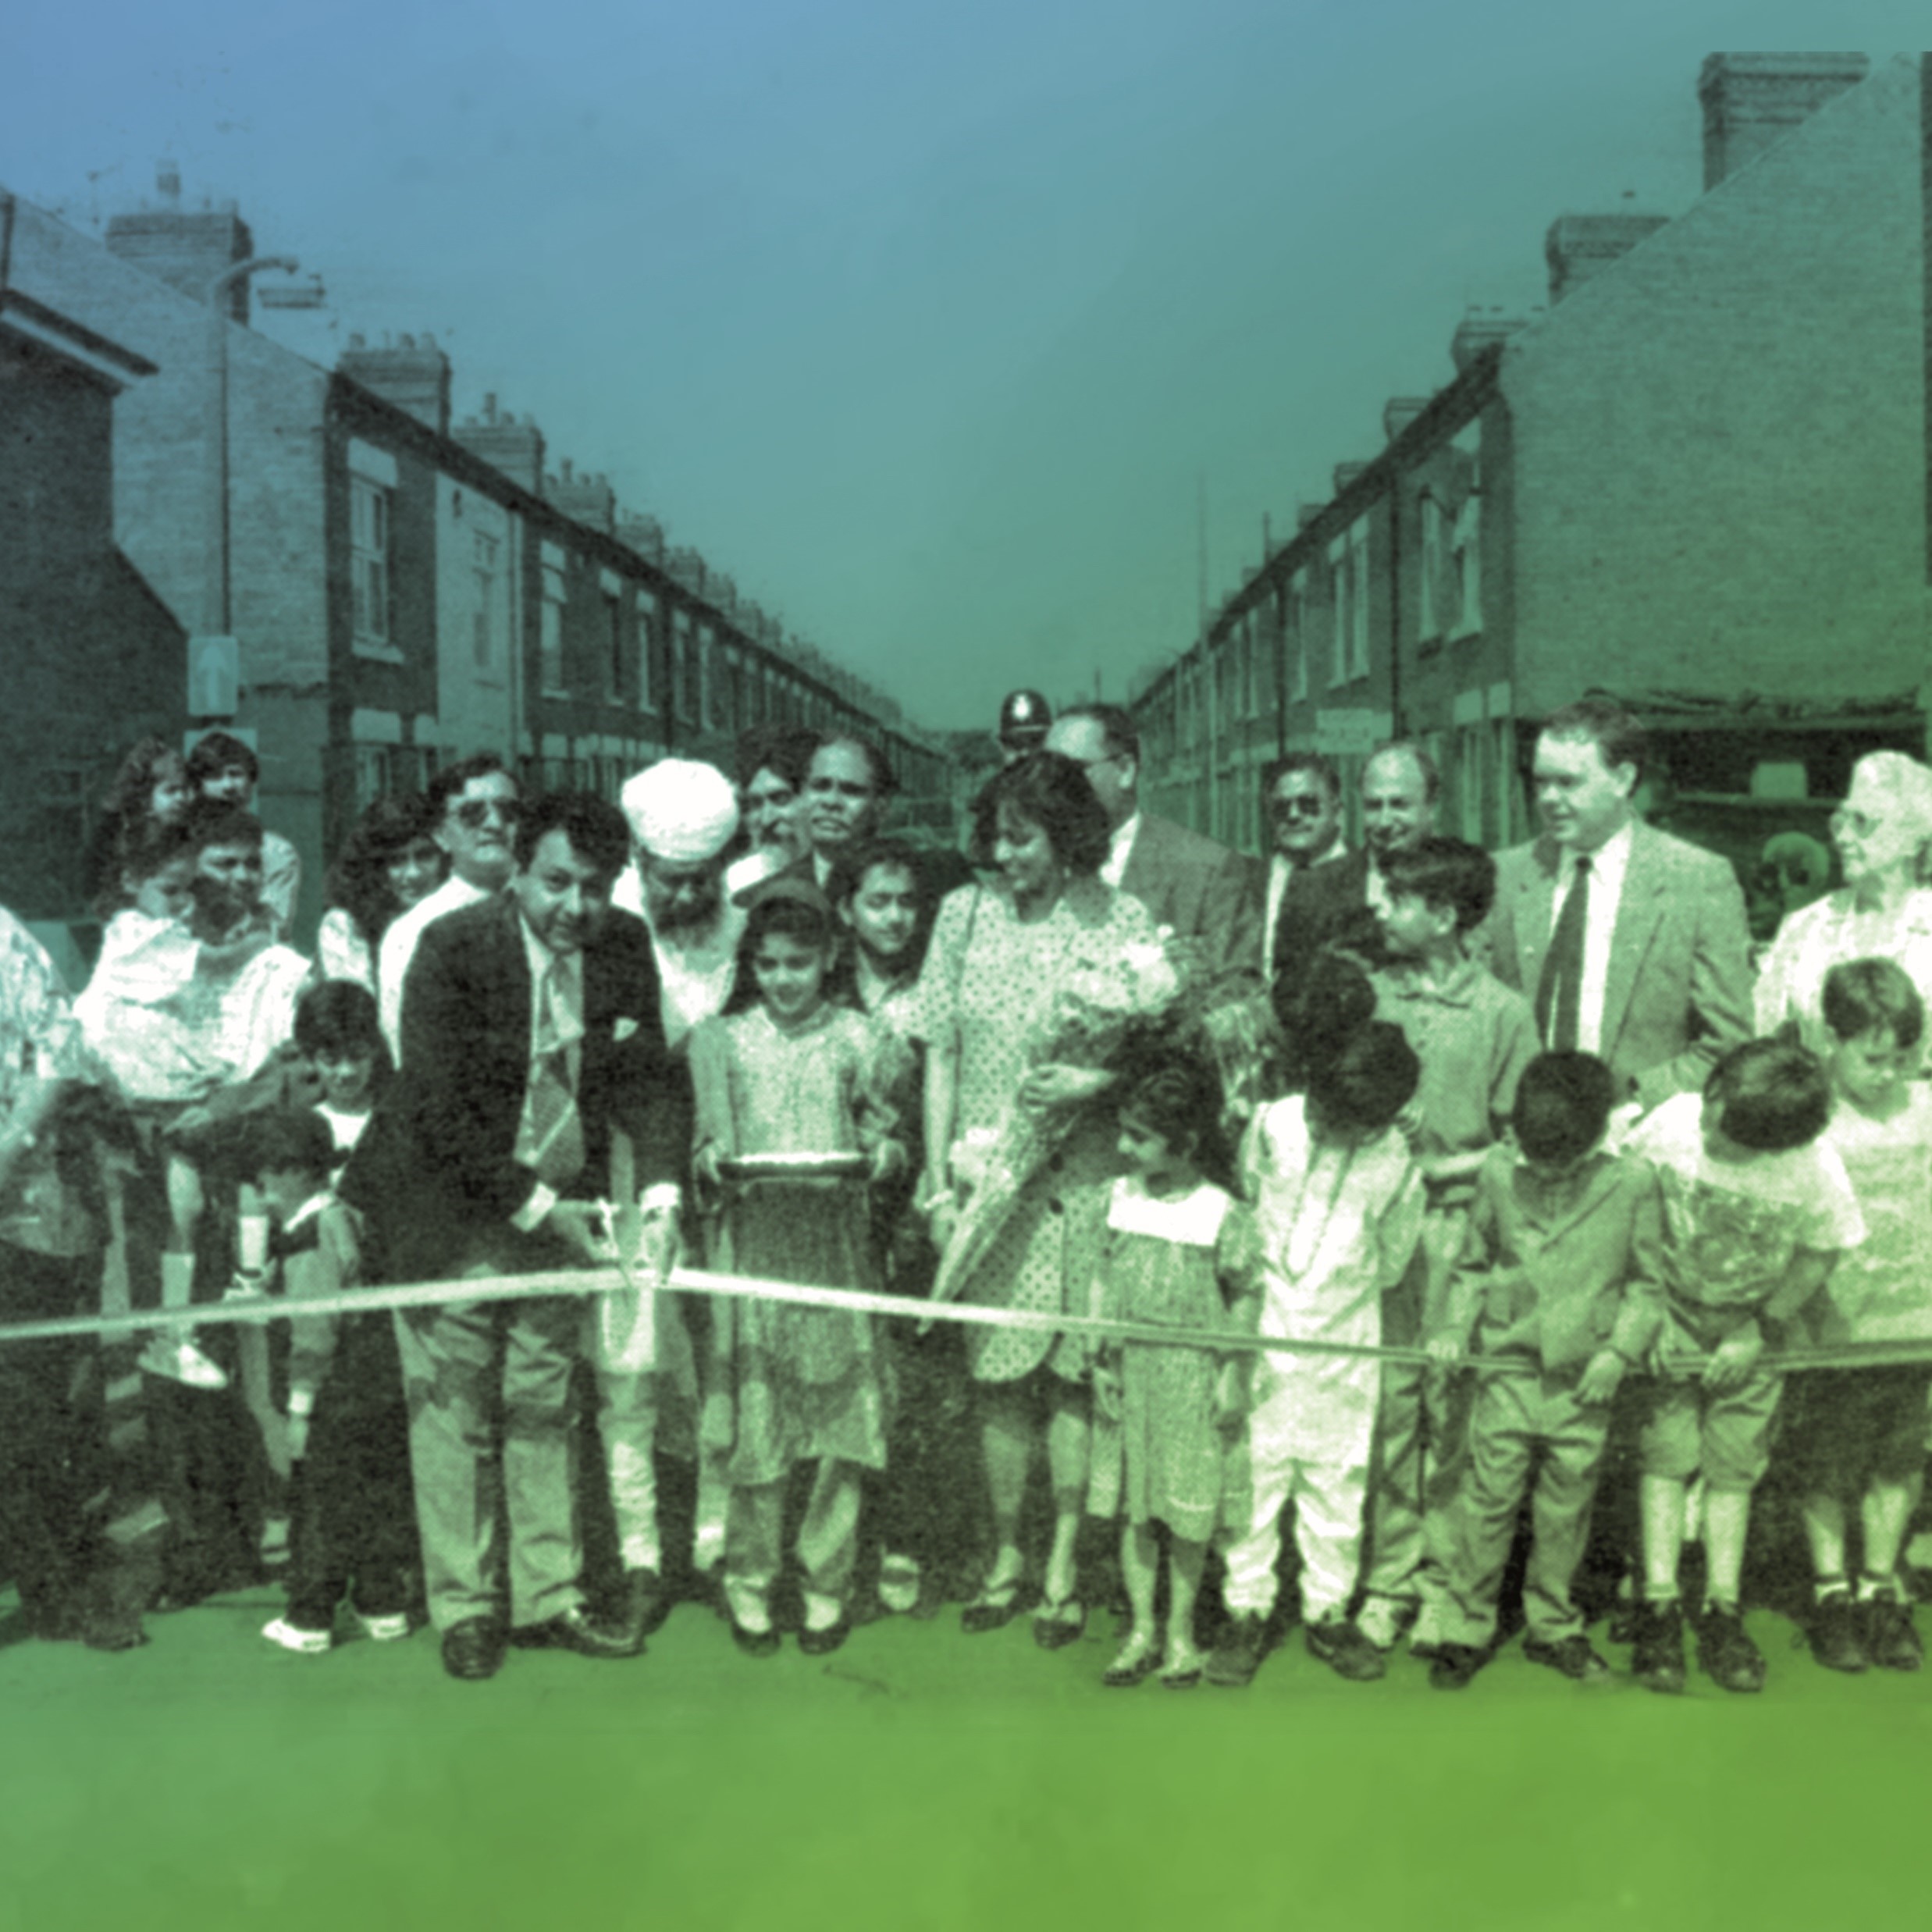 Rebuilding Lives: Exhibition Guided Tours